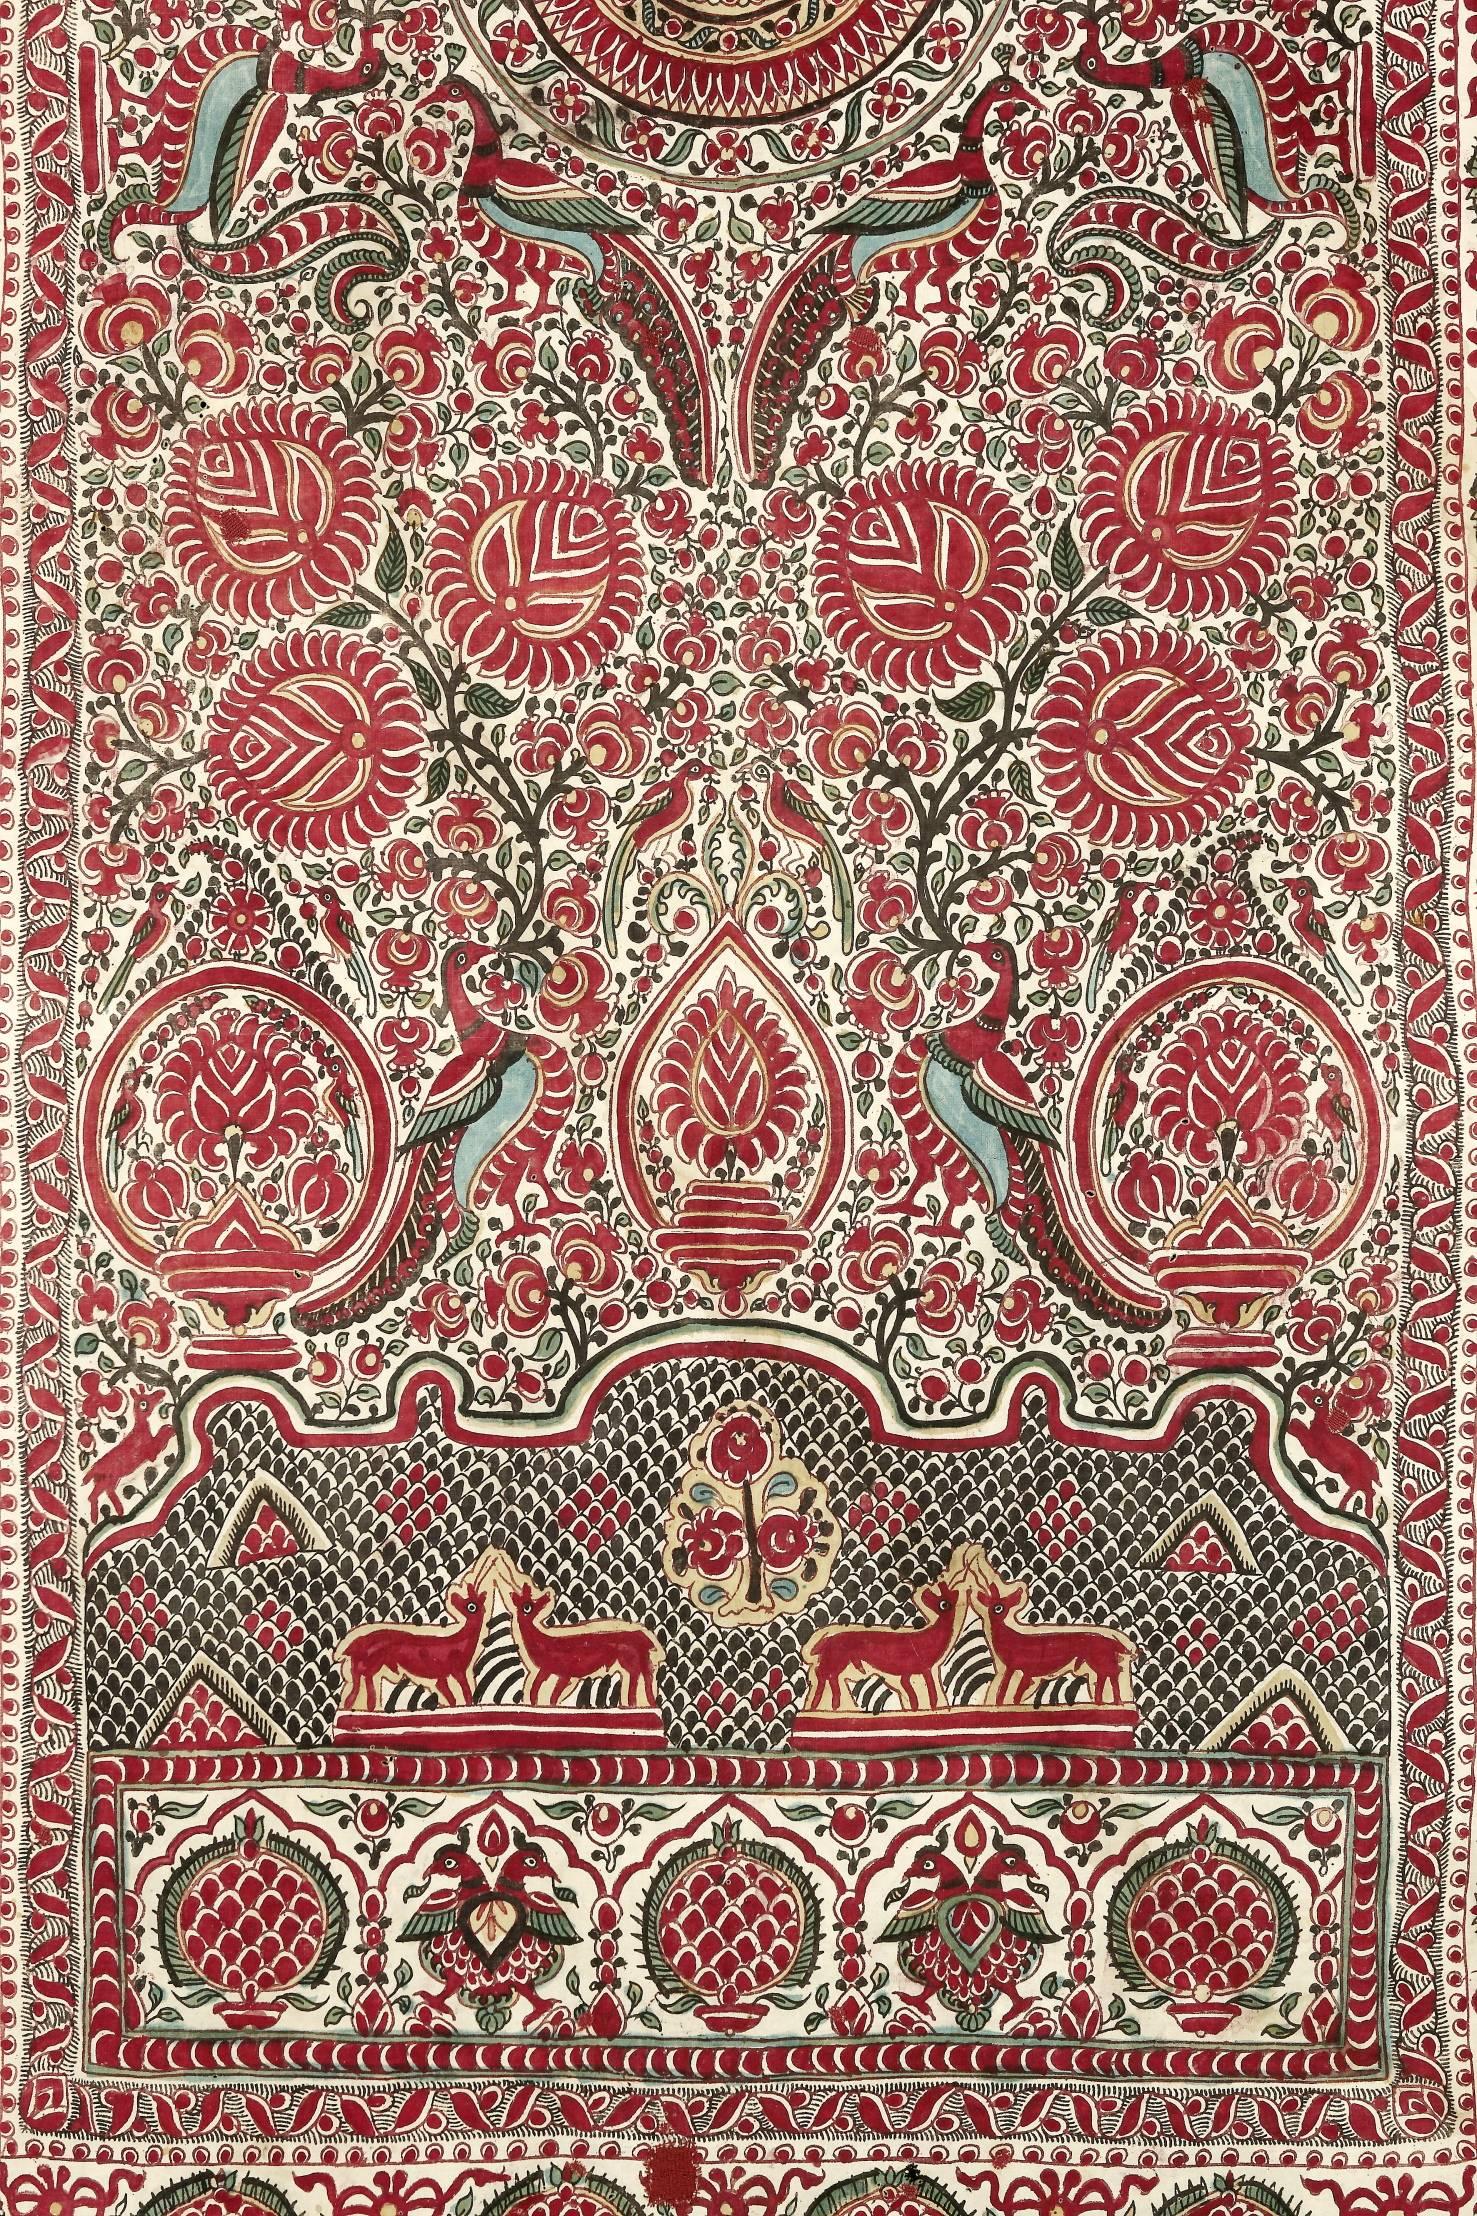 1840-1880 Palampore, ceremonial canopy, hand-painted mordant dyed pattern of birds among central floral medallion on cotton. All natural dyes, produced for the Indonesian market by Indian people, Coromandel coast, southeast India.
Measures: 130 x